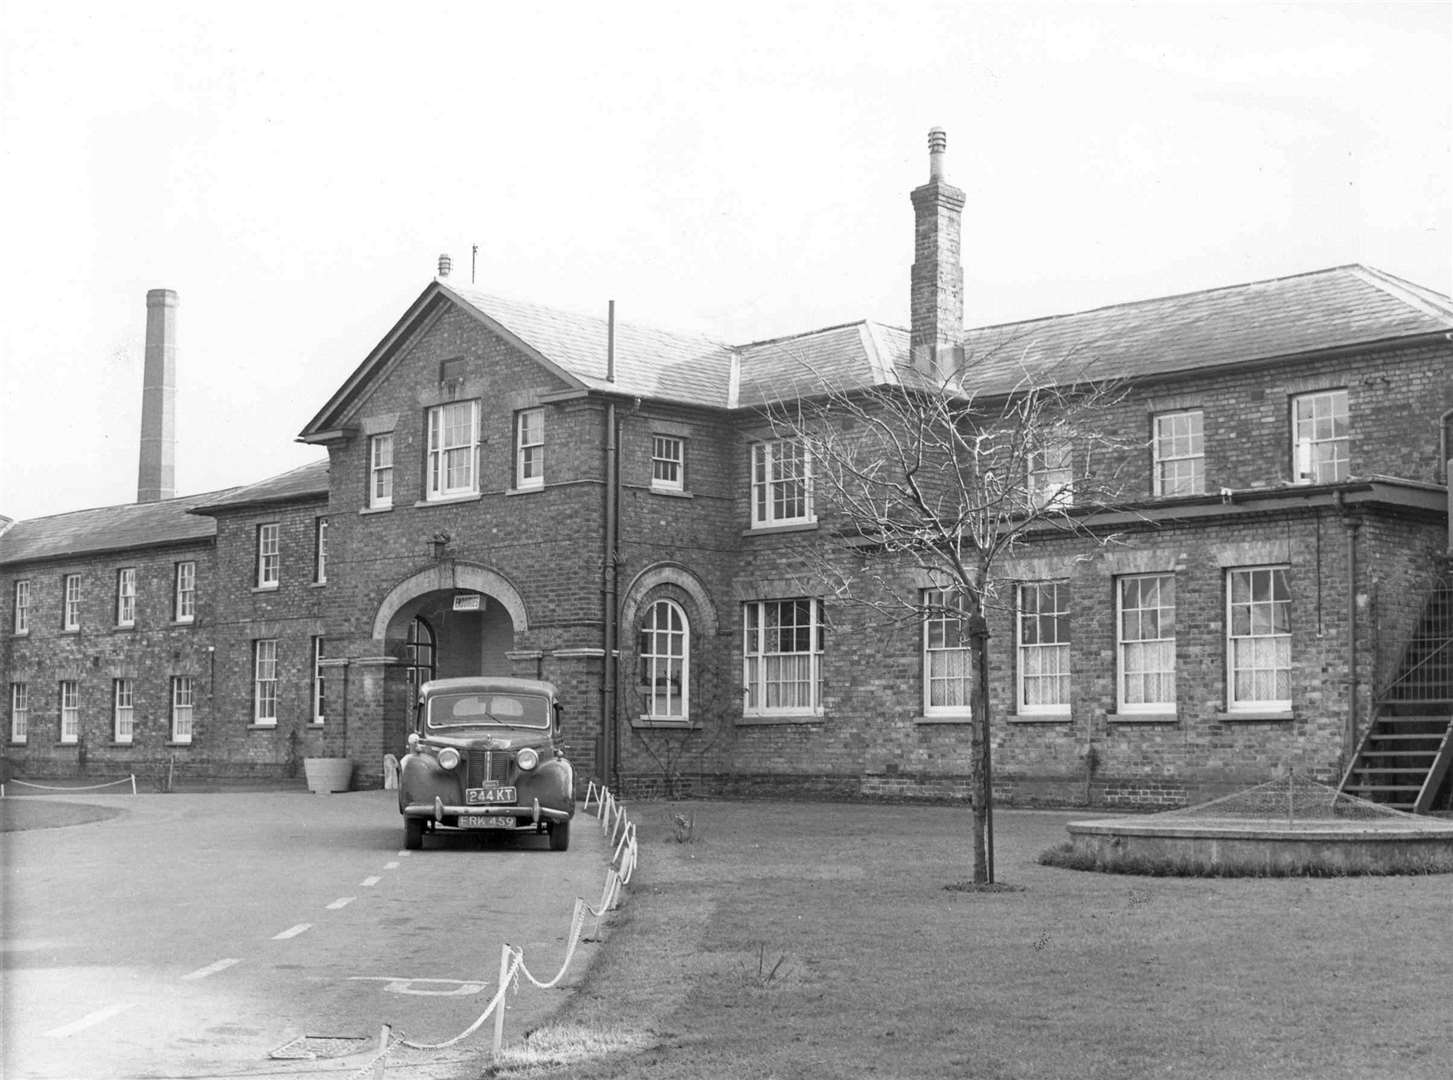 Linton Hospital pictured in 1964. It was originally a Maidstone workhouse